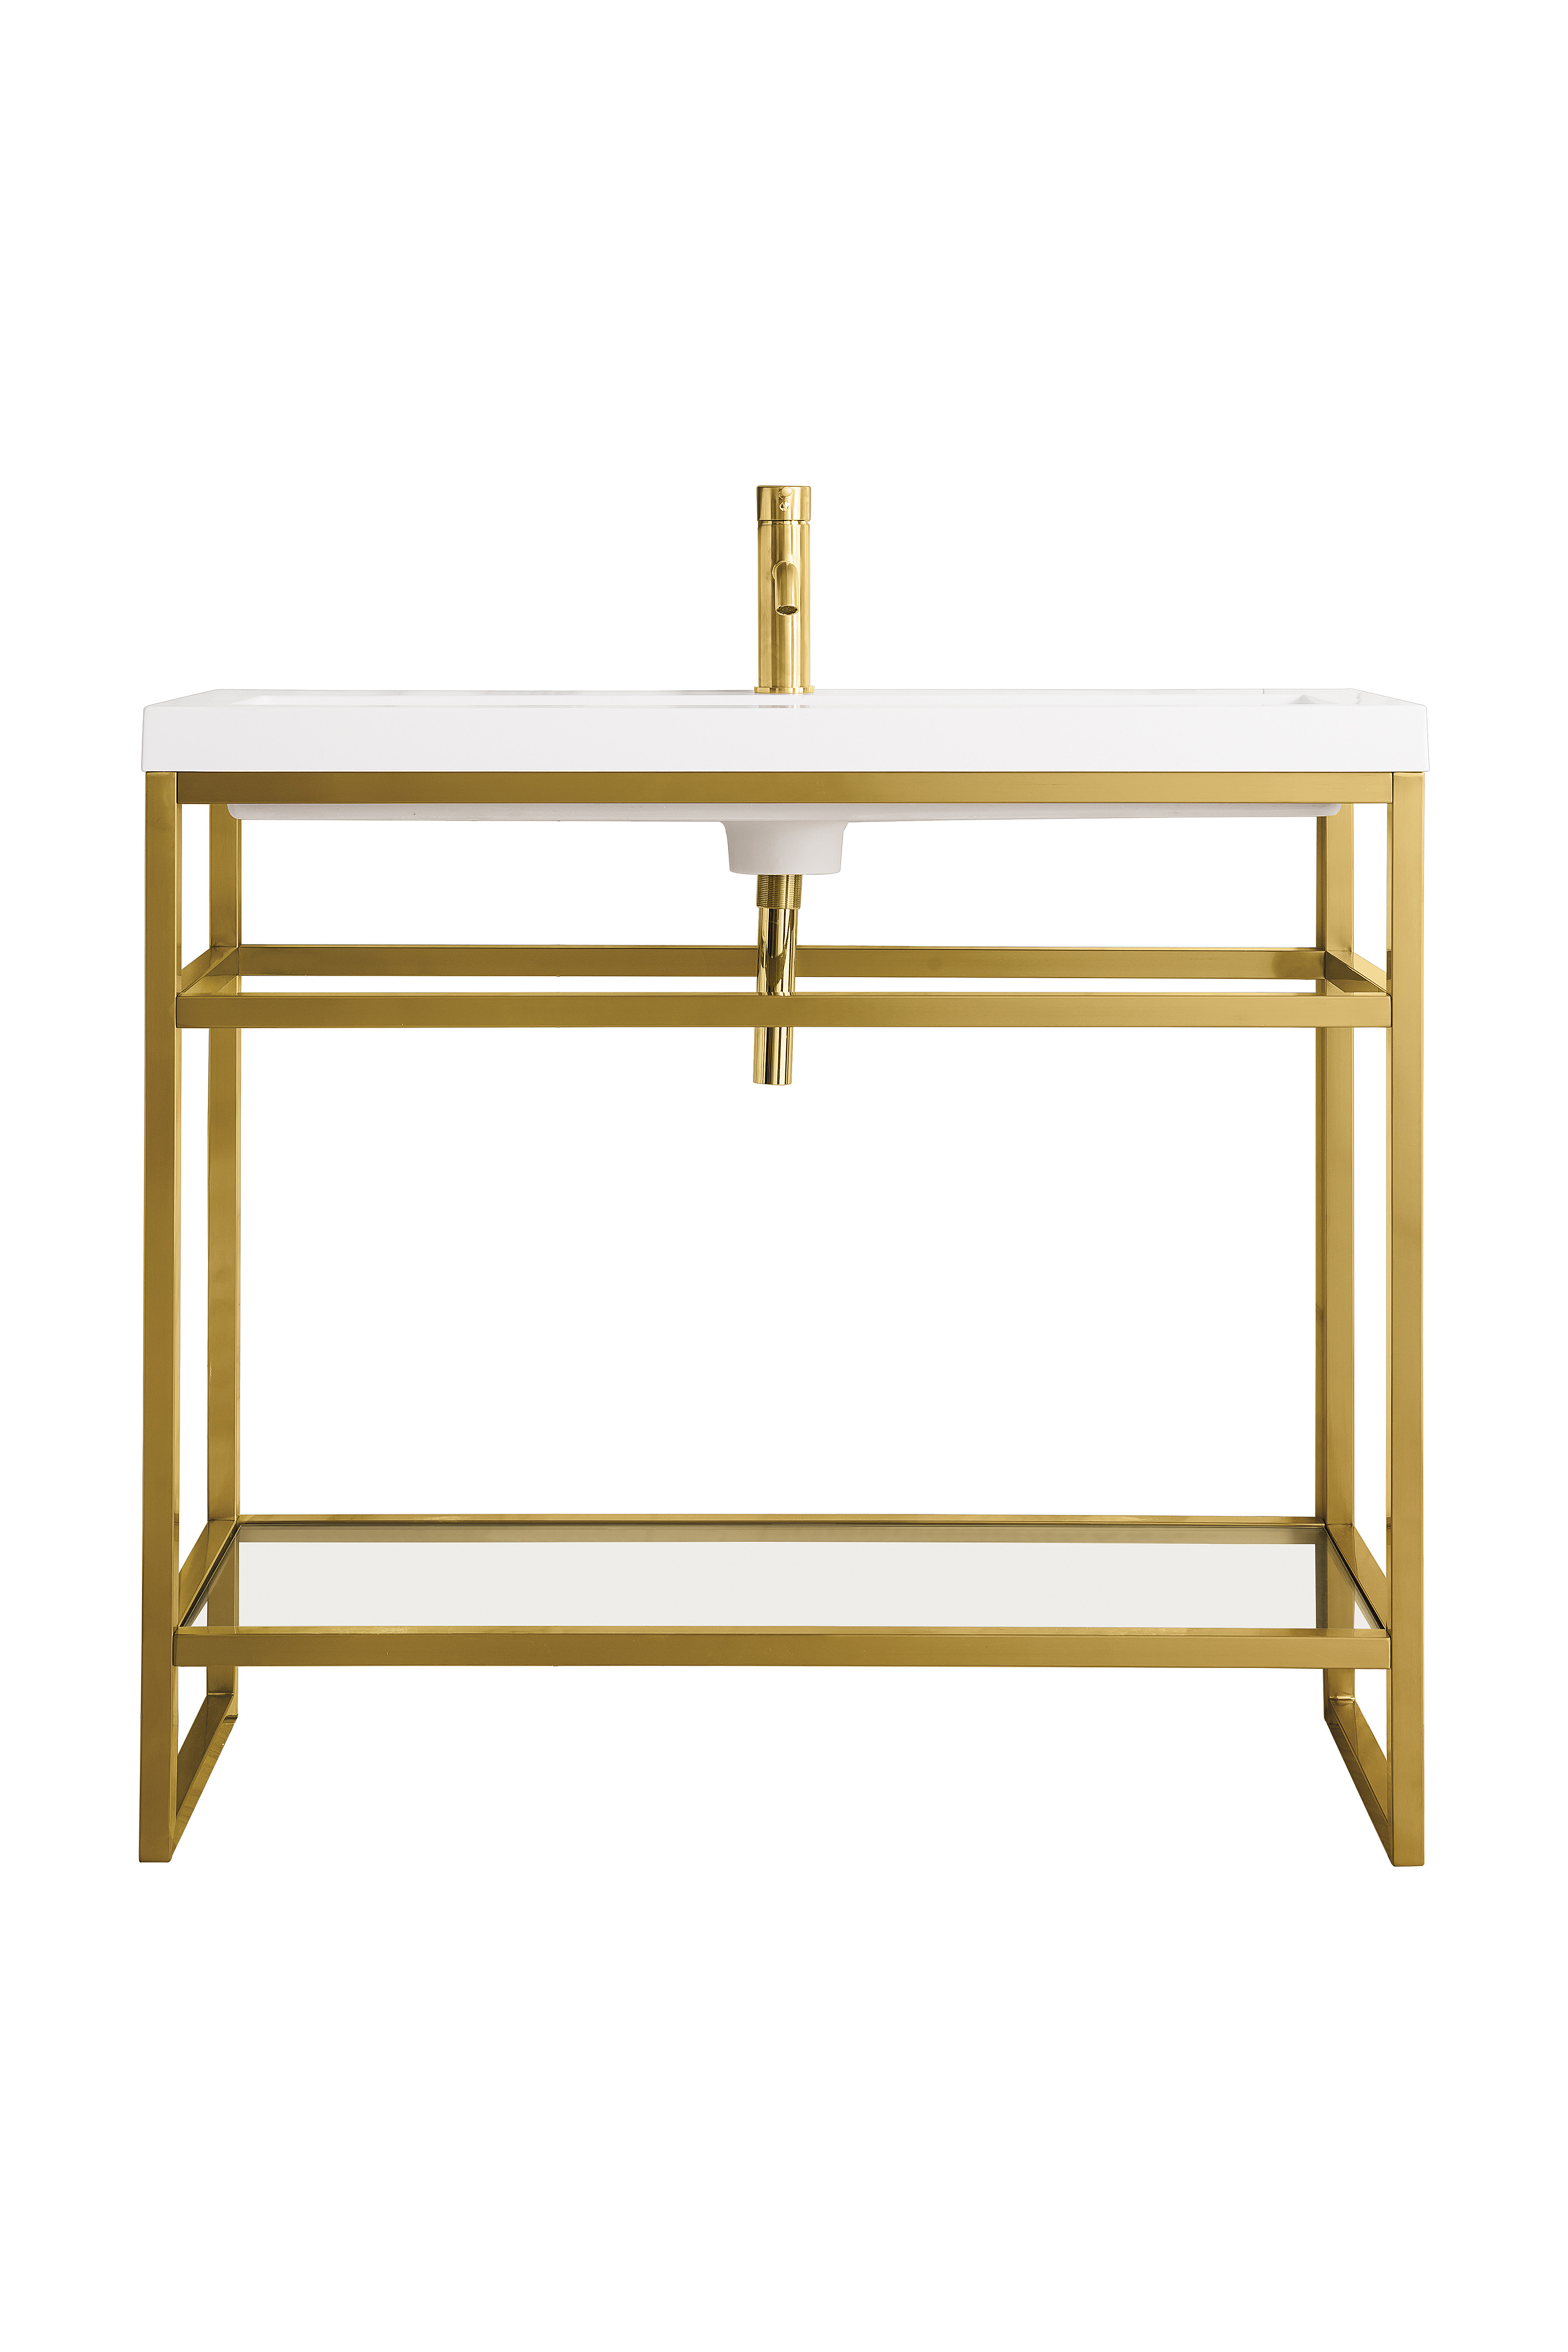 James Martin C105V39.5RGDWG Boston 39.5" Stainless Steel Sink Console, Radiant Gold w/ White Glossy Composite Countertop